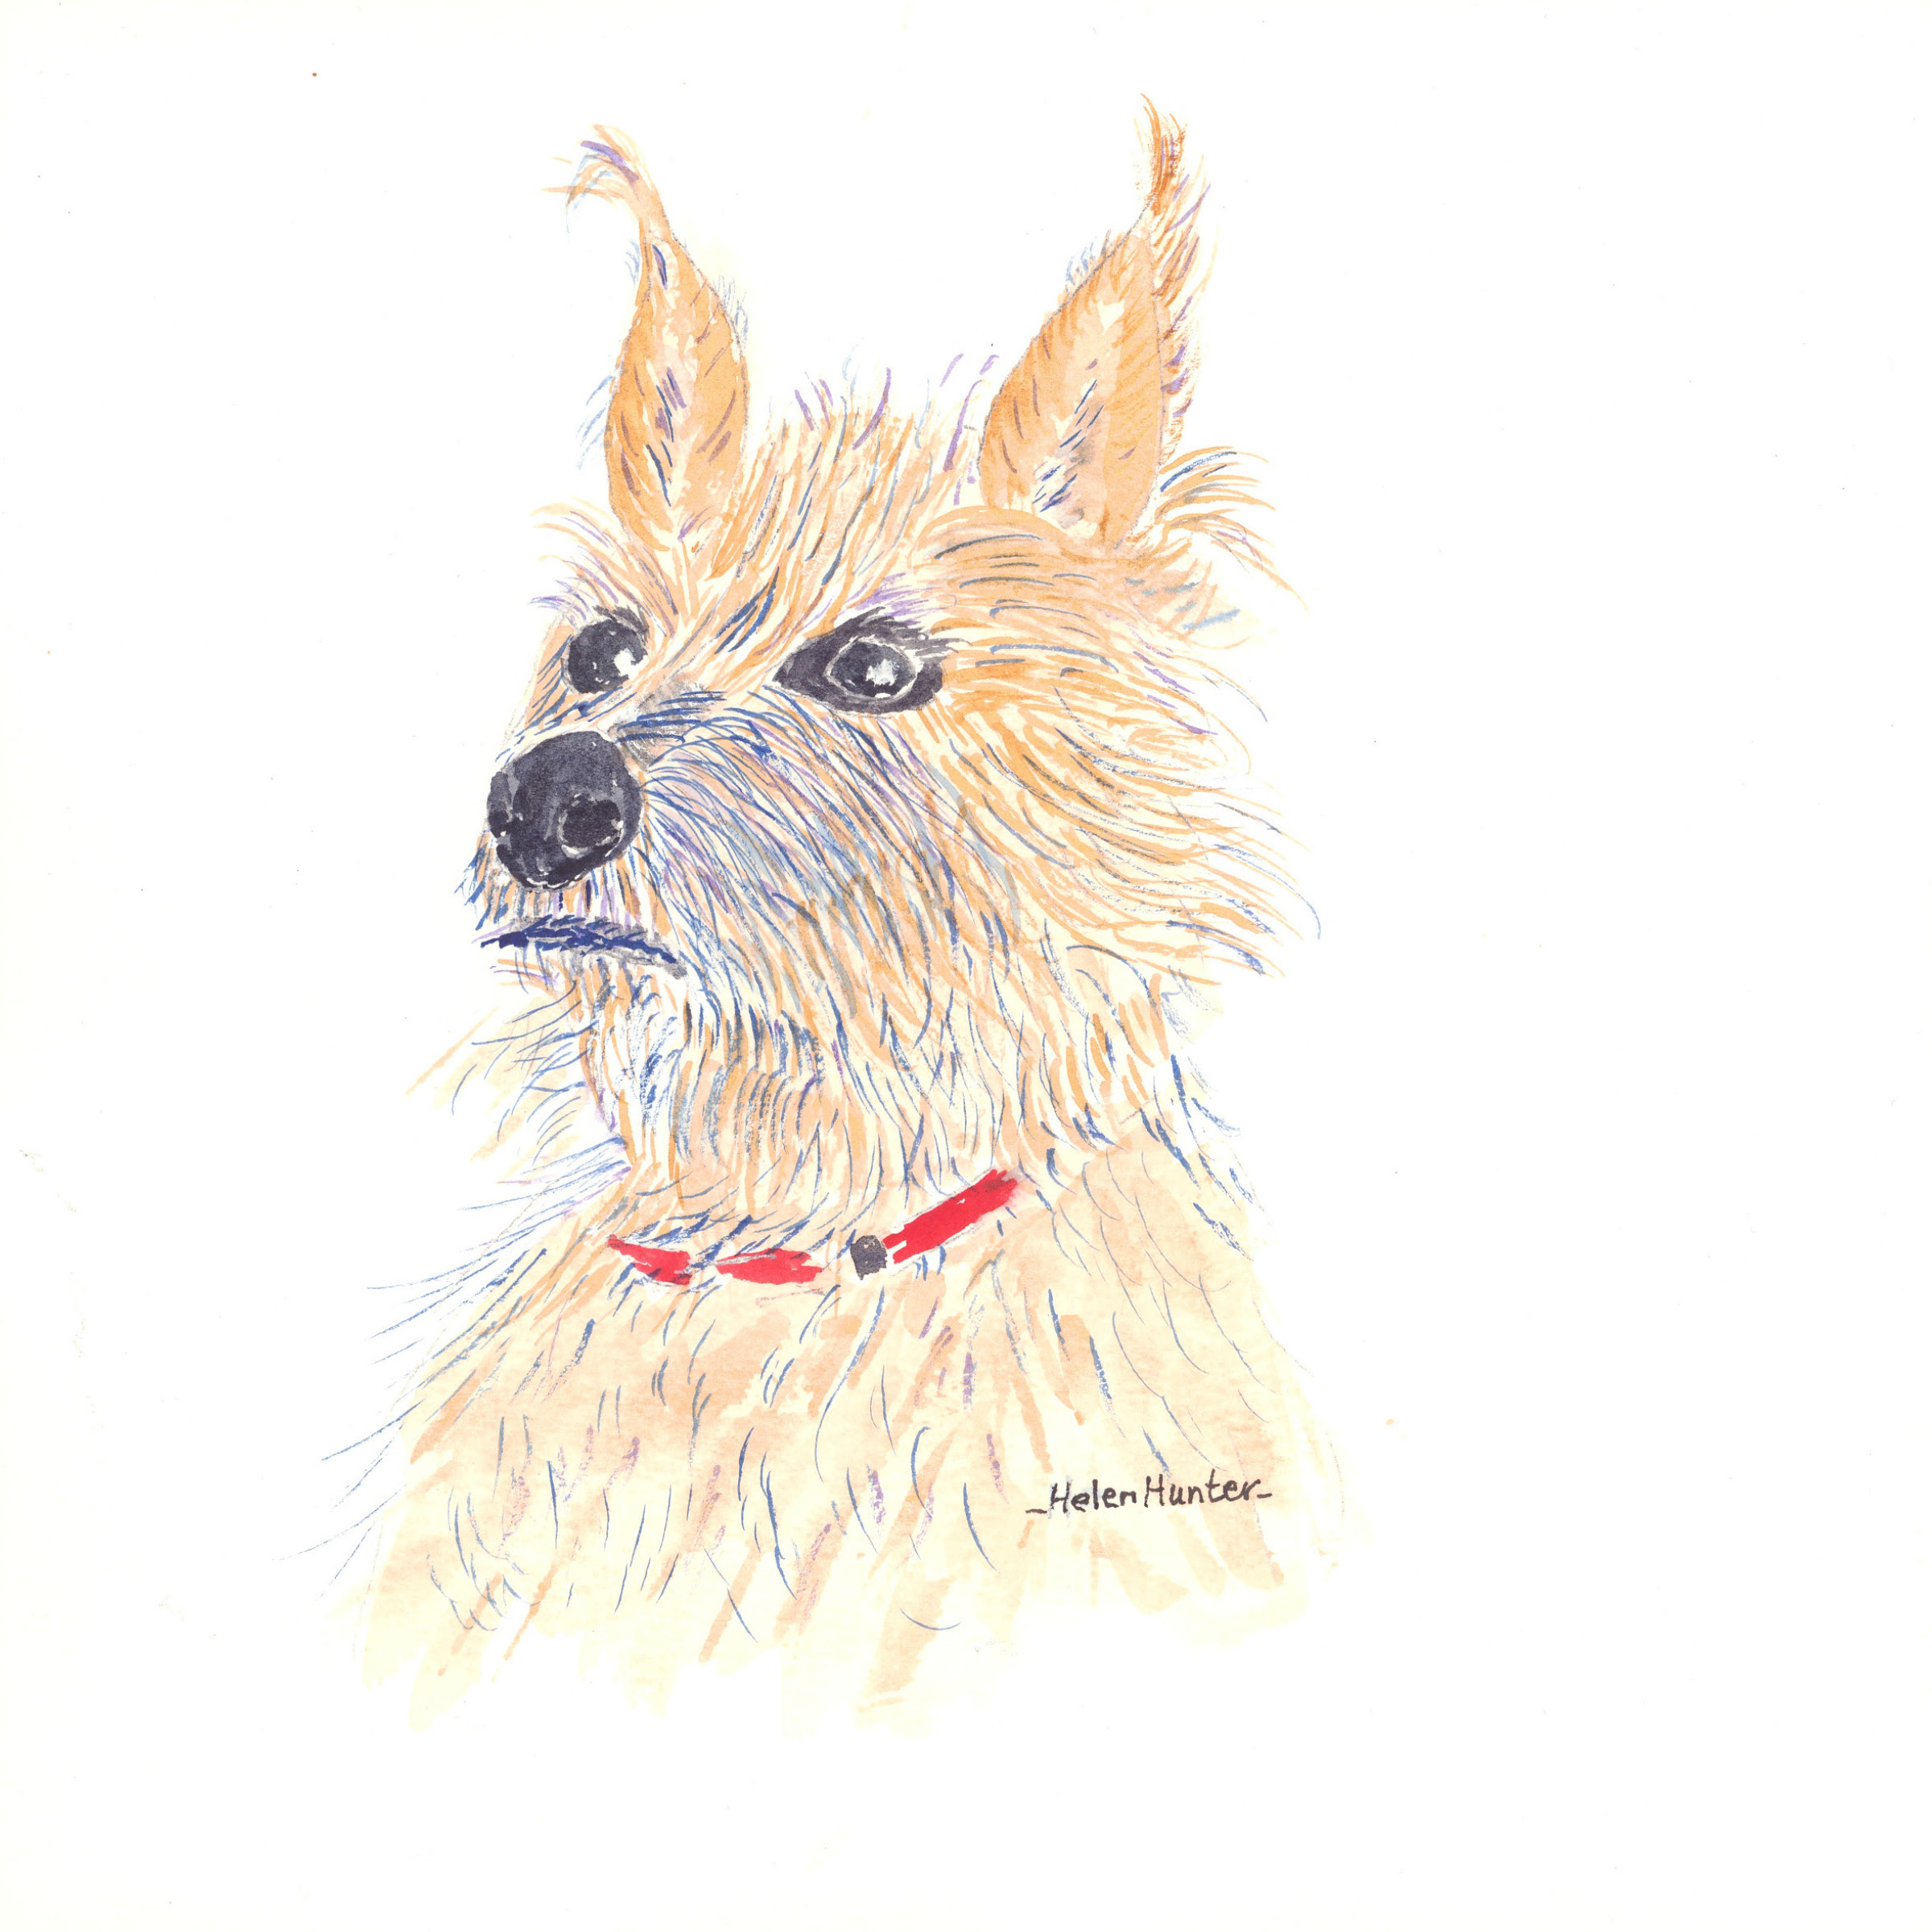 A drawing is of a small yellow dog with a red collar